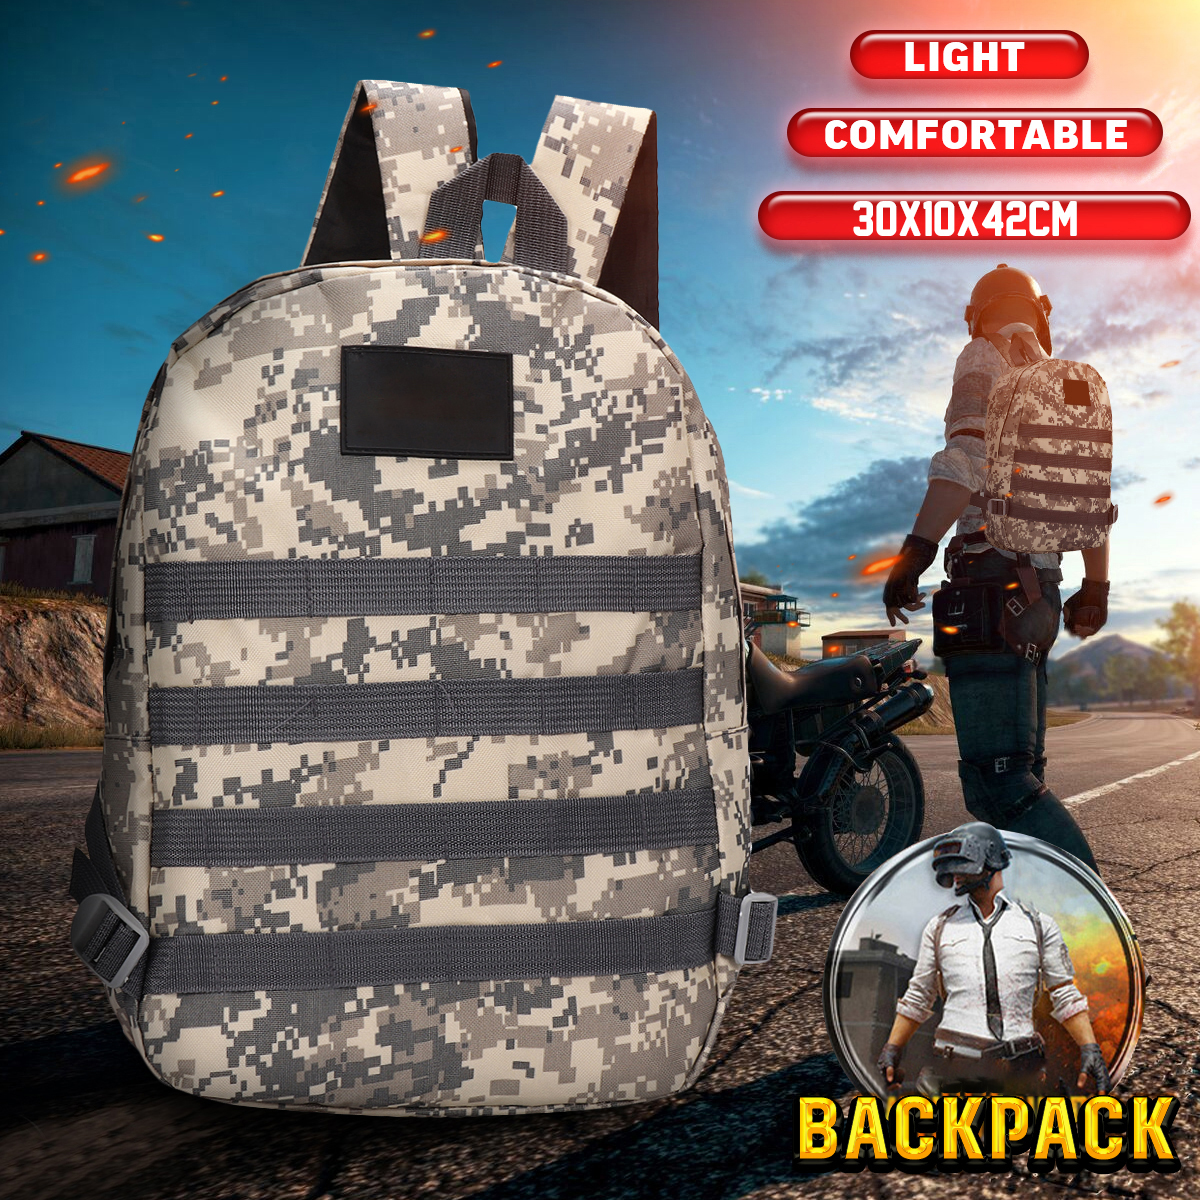 Camouflage-Large-Capacity-Oxford-Cloth-Macbook-Mobile-Phone-Storage-Bag-Backpack-1860030-1